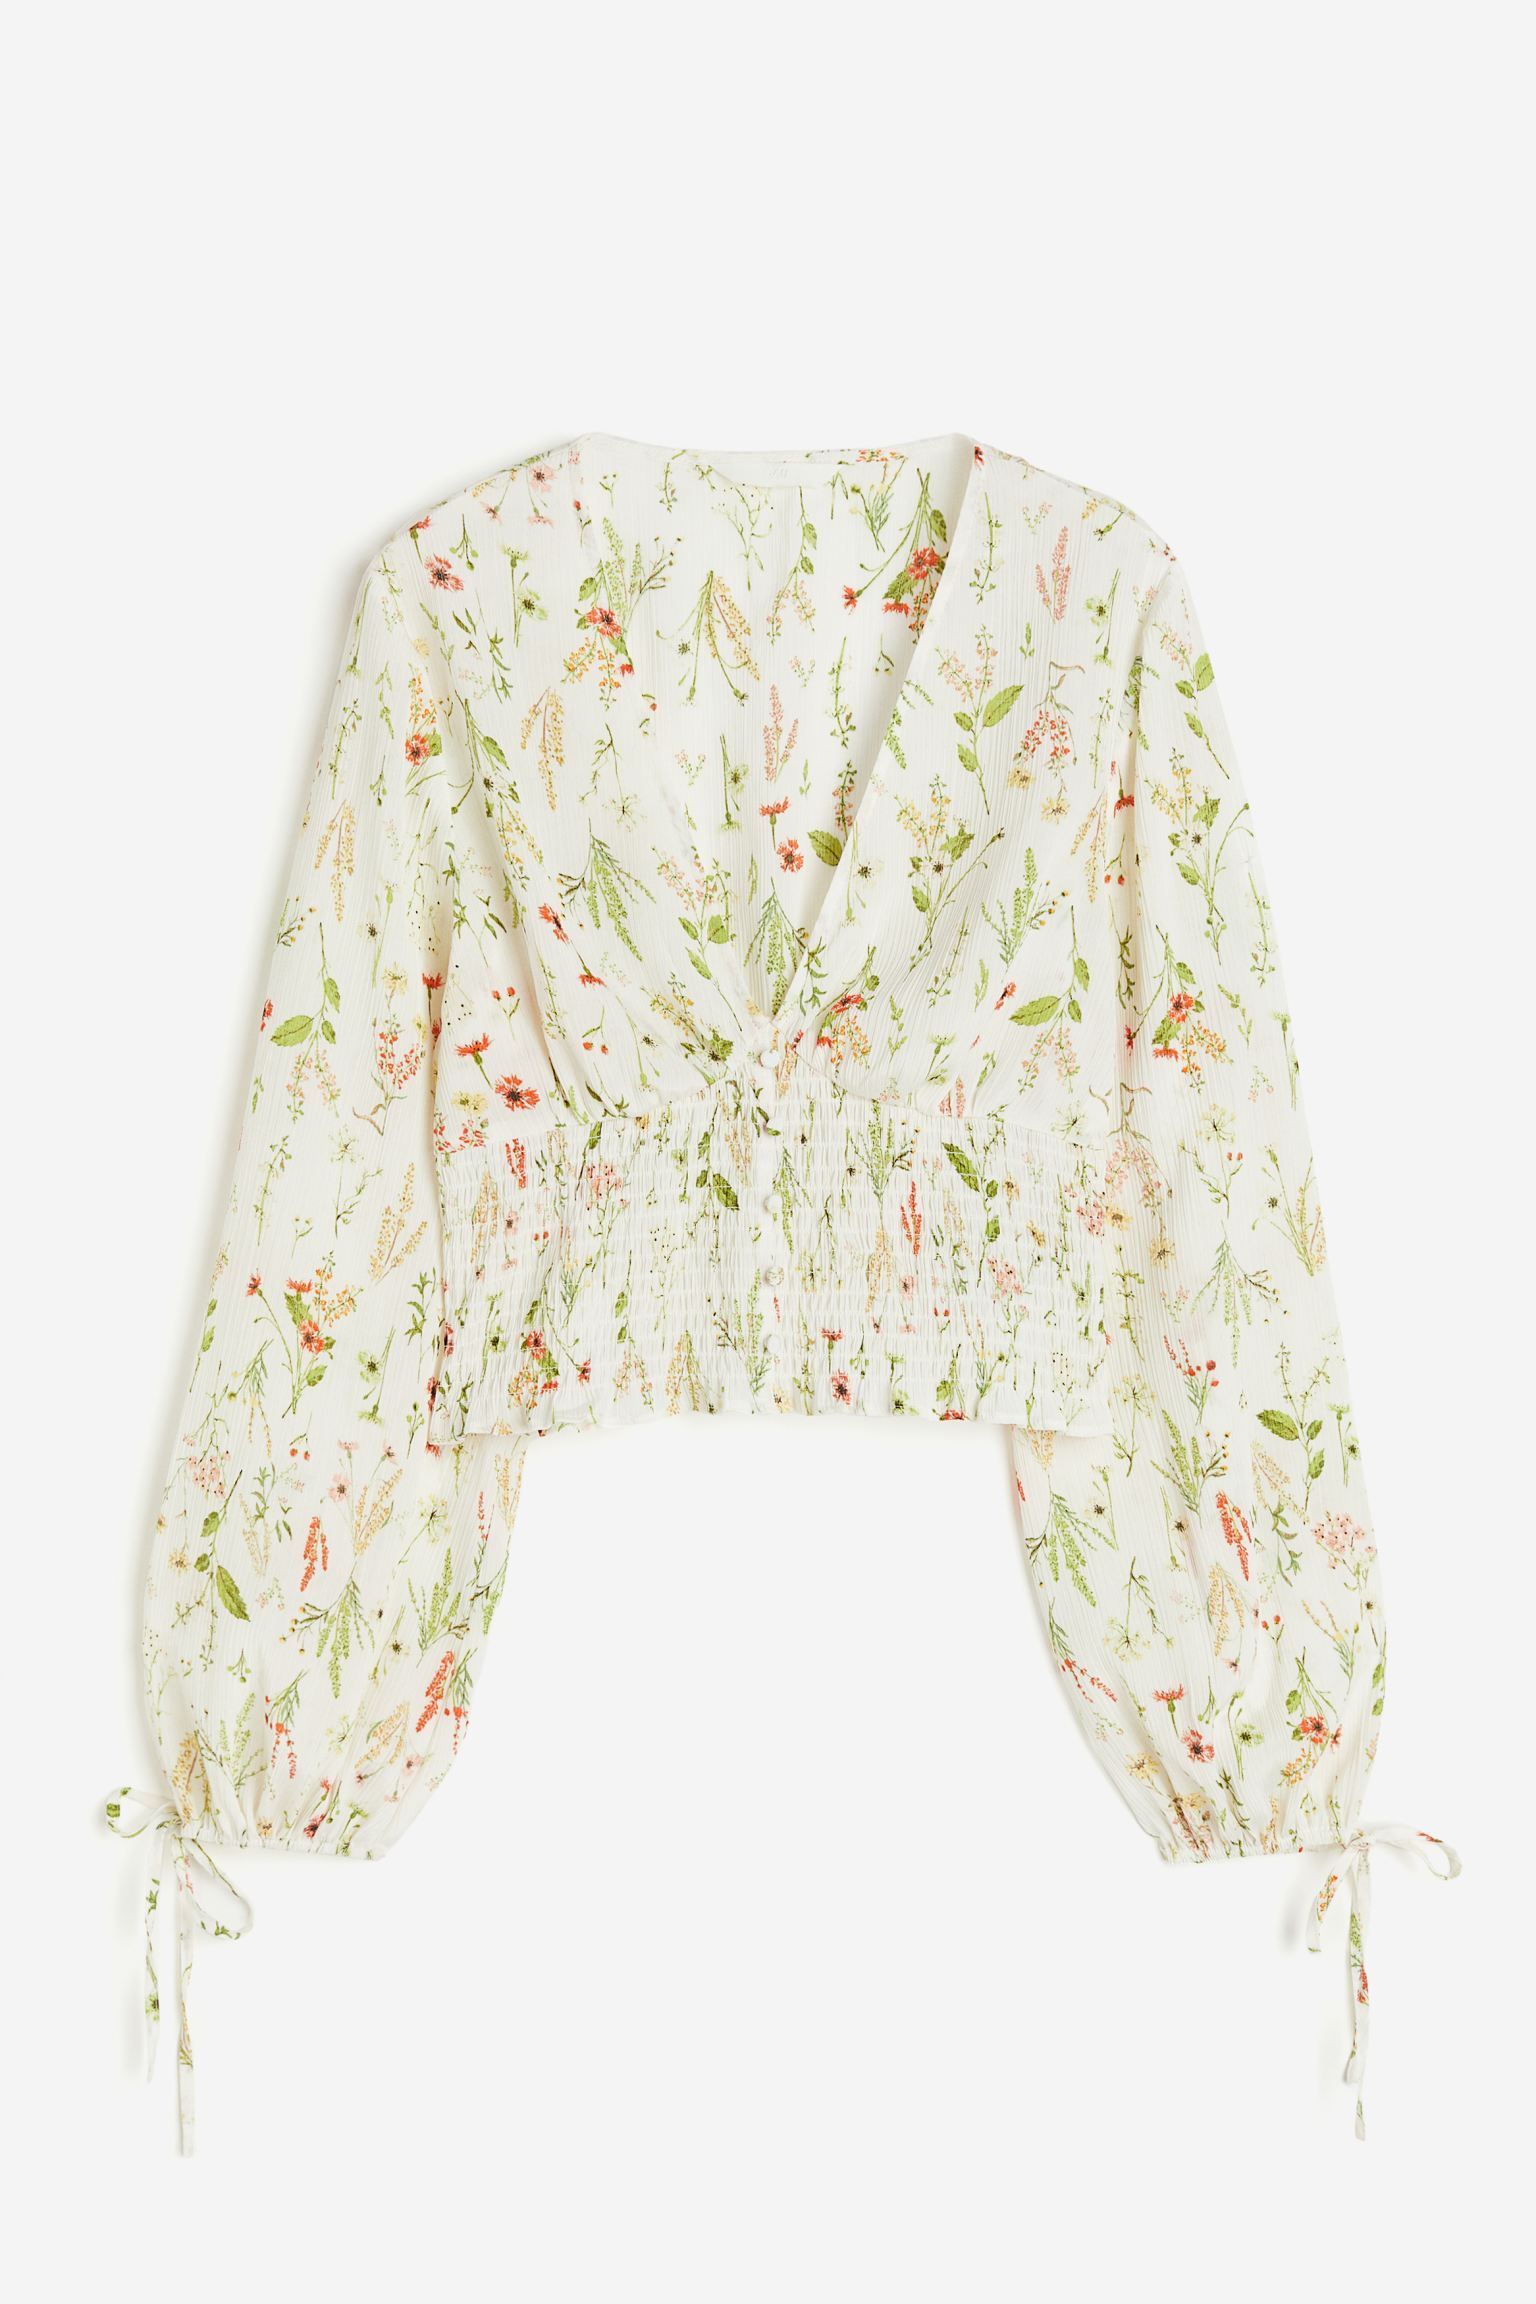 Cropped V-neck blouse - White/Blue floral - Ladies | H&M GB | H&M (UK, MY, IN, SG, PH, TW, HK)